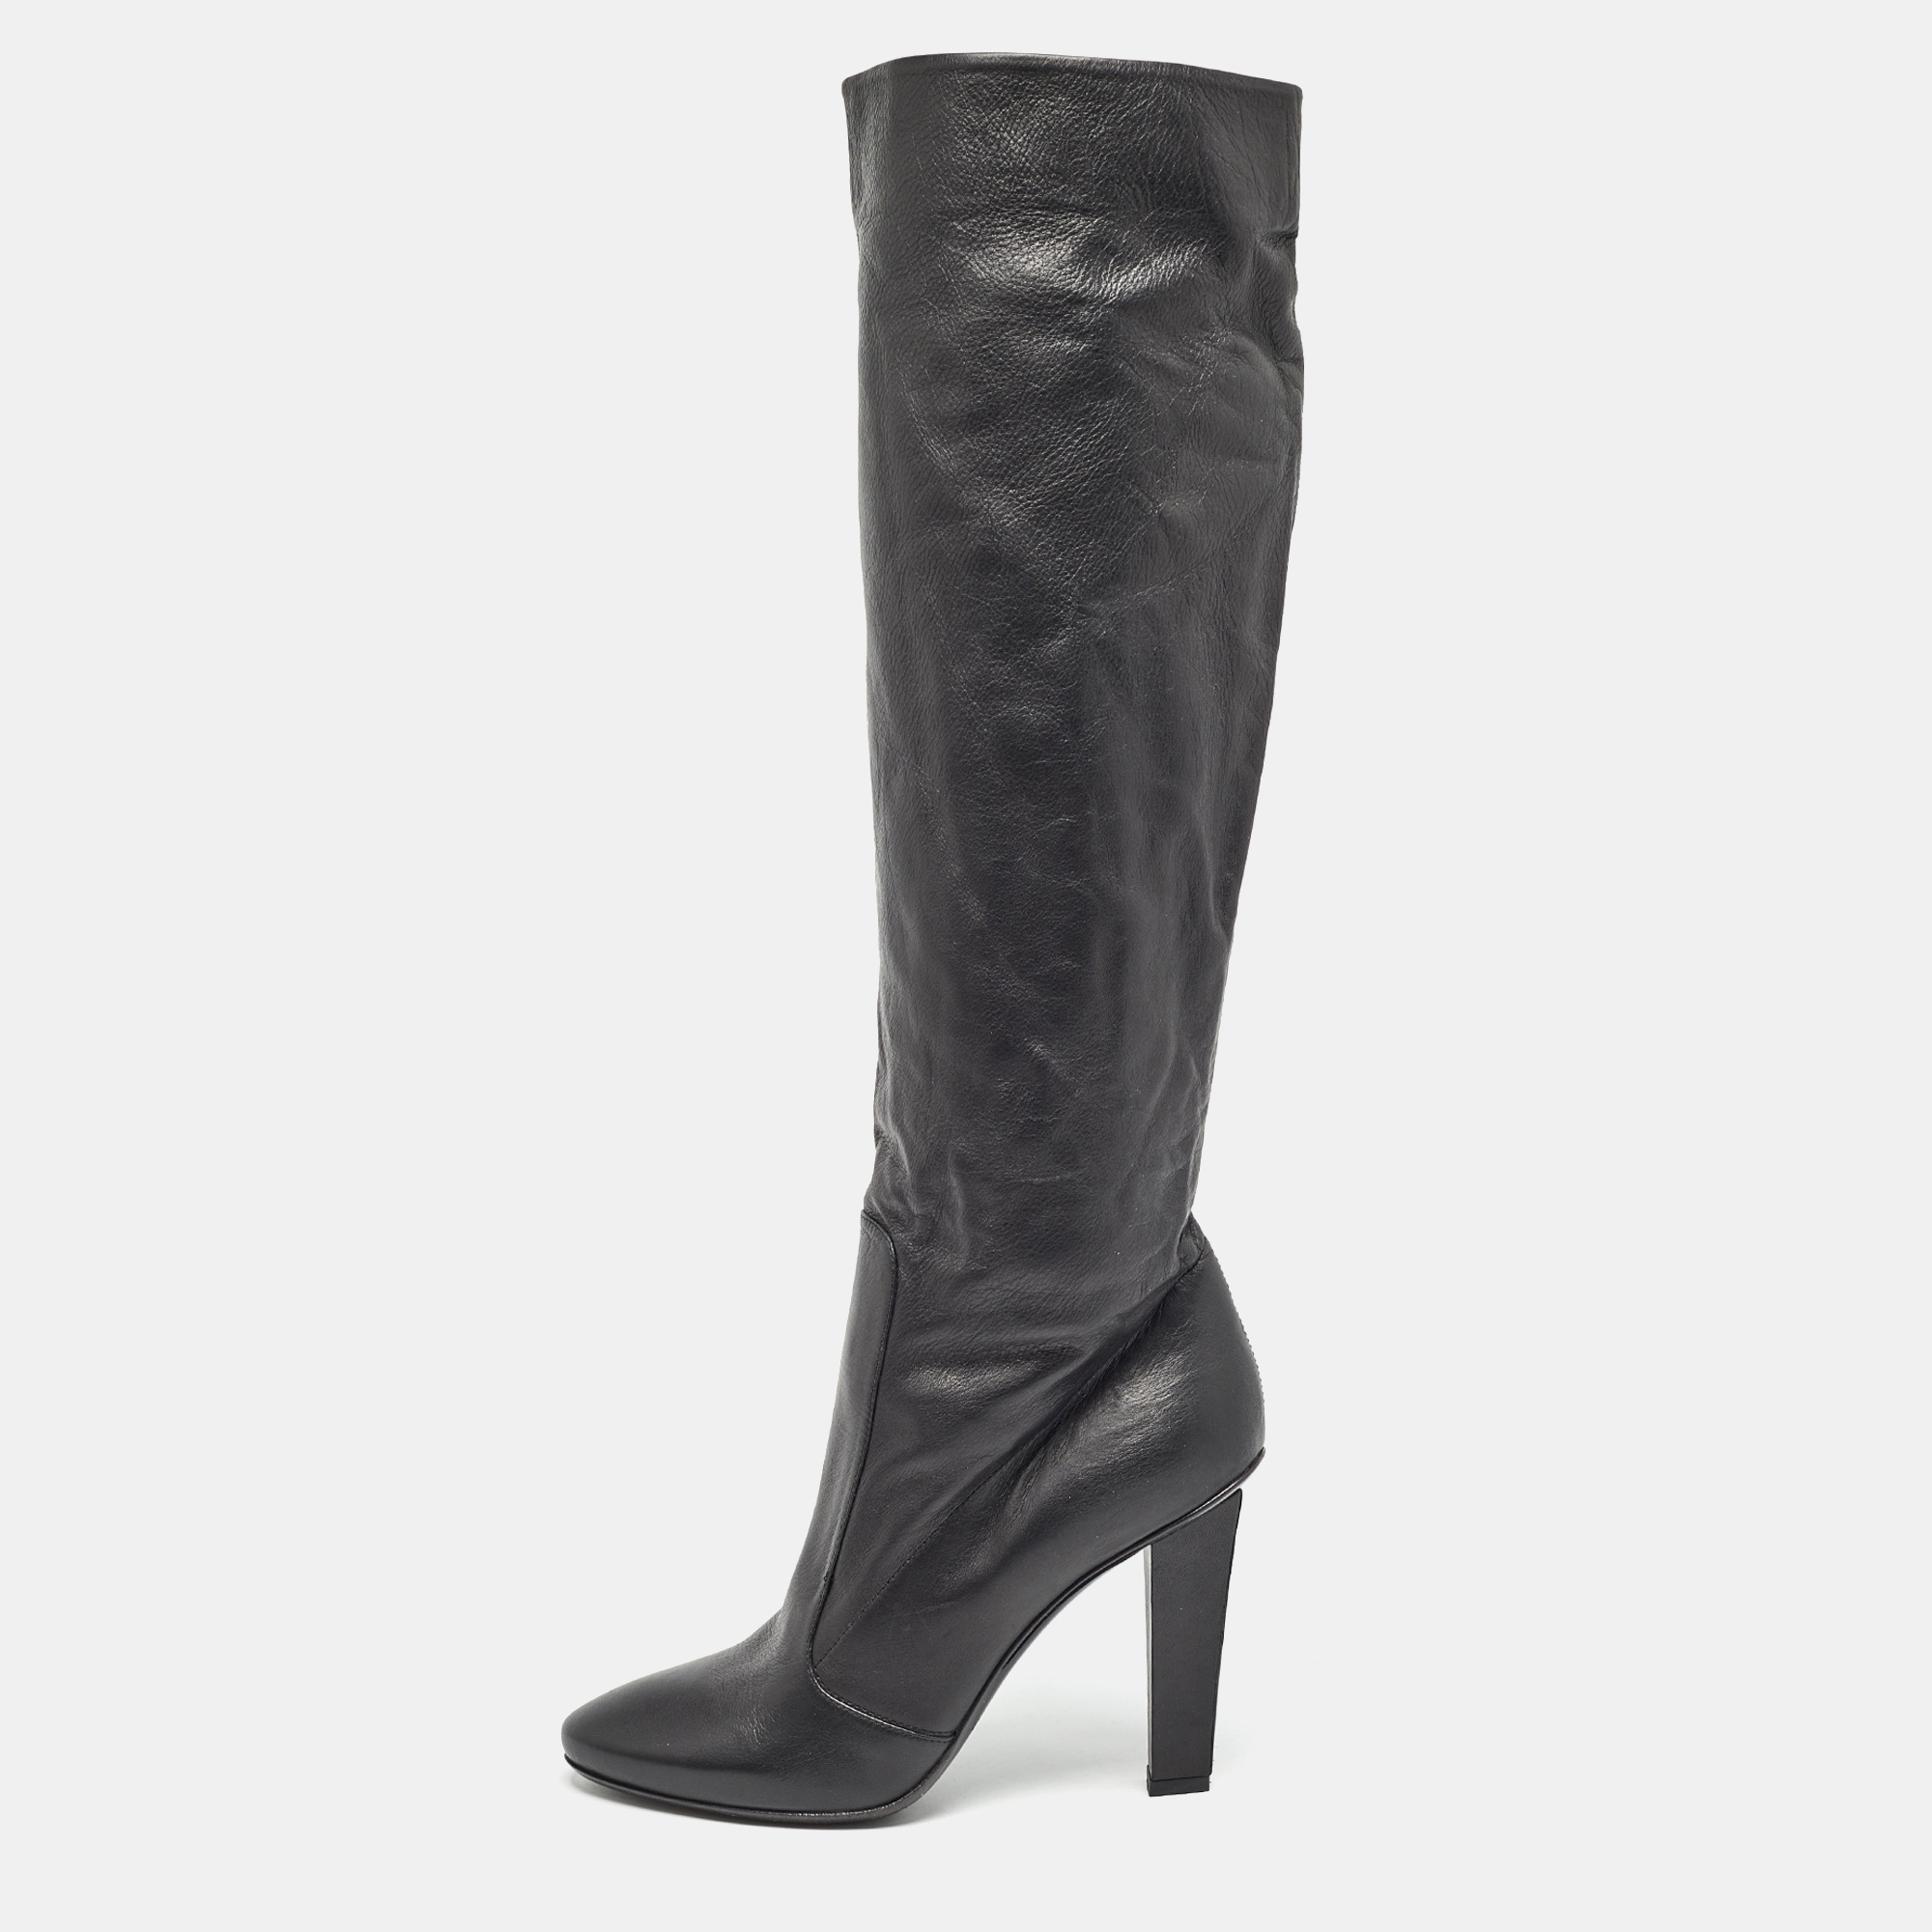 Pre-owned Jimmy Choo Black Leather Knee Length Boots Size 37